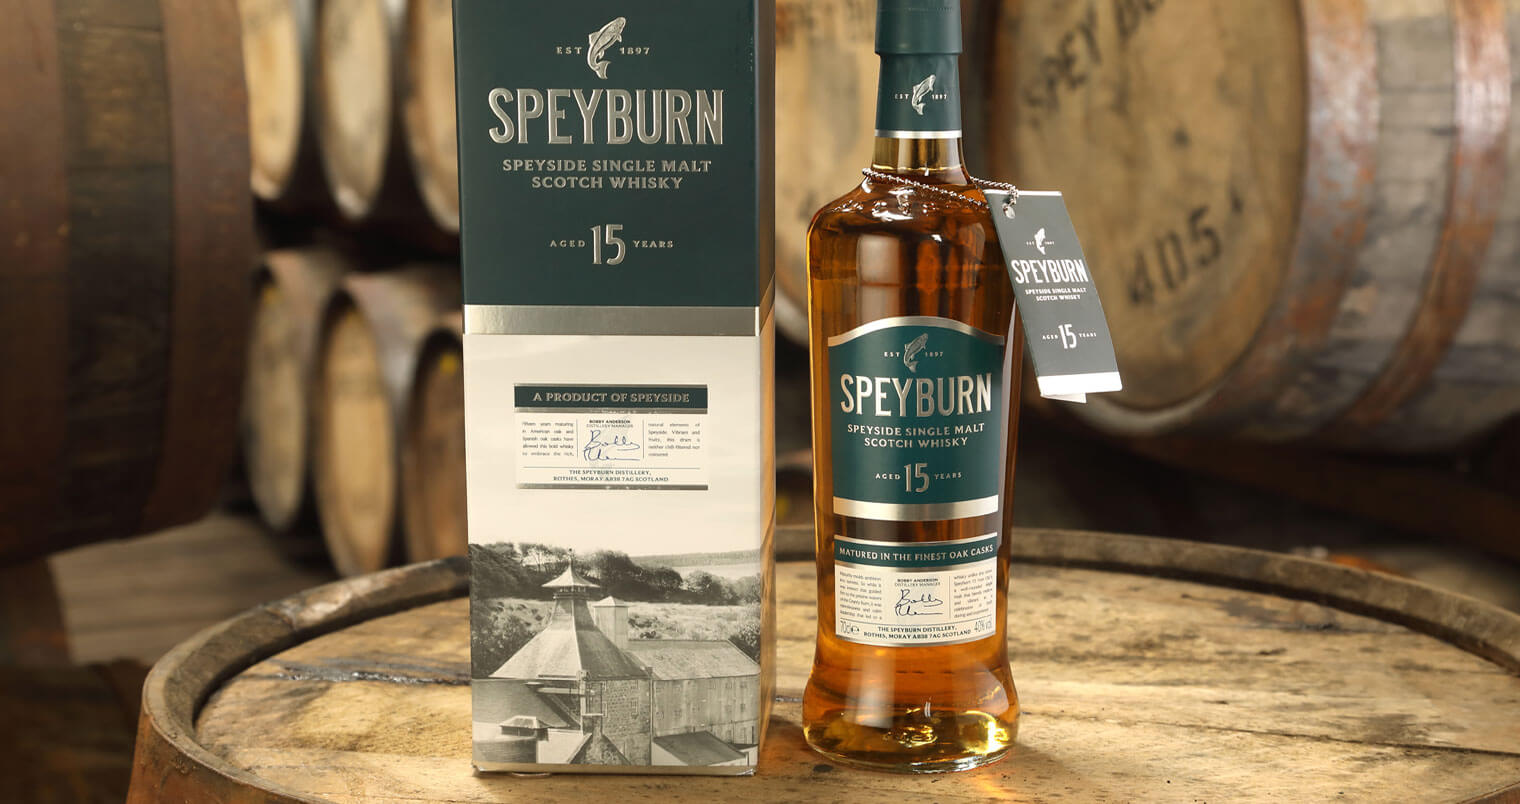 Speyburn Single Malt Scotch Whisky Releases 15 Years Old, featured image